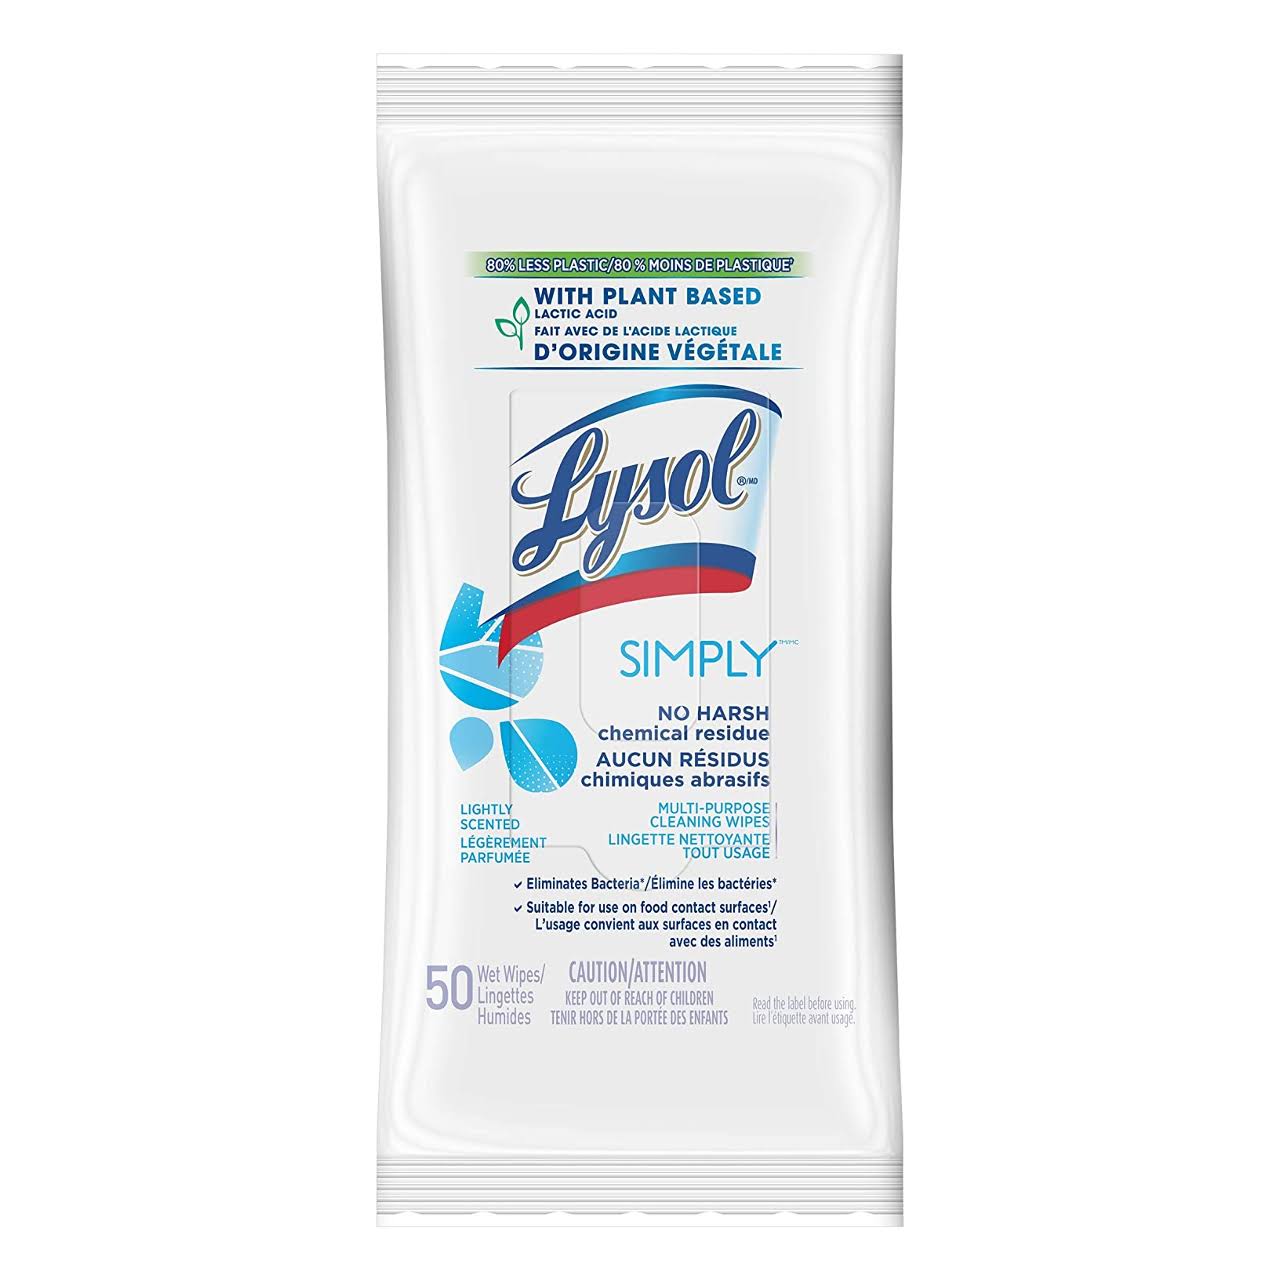 Lysol Simply Multi-Purpose Cleaning Wipes, Lightly Scented